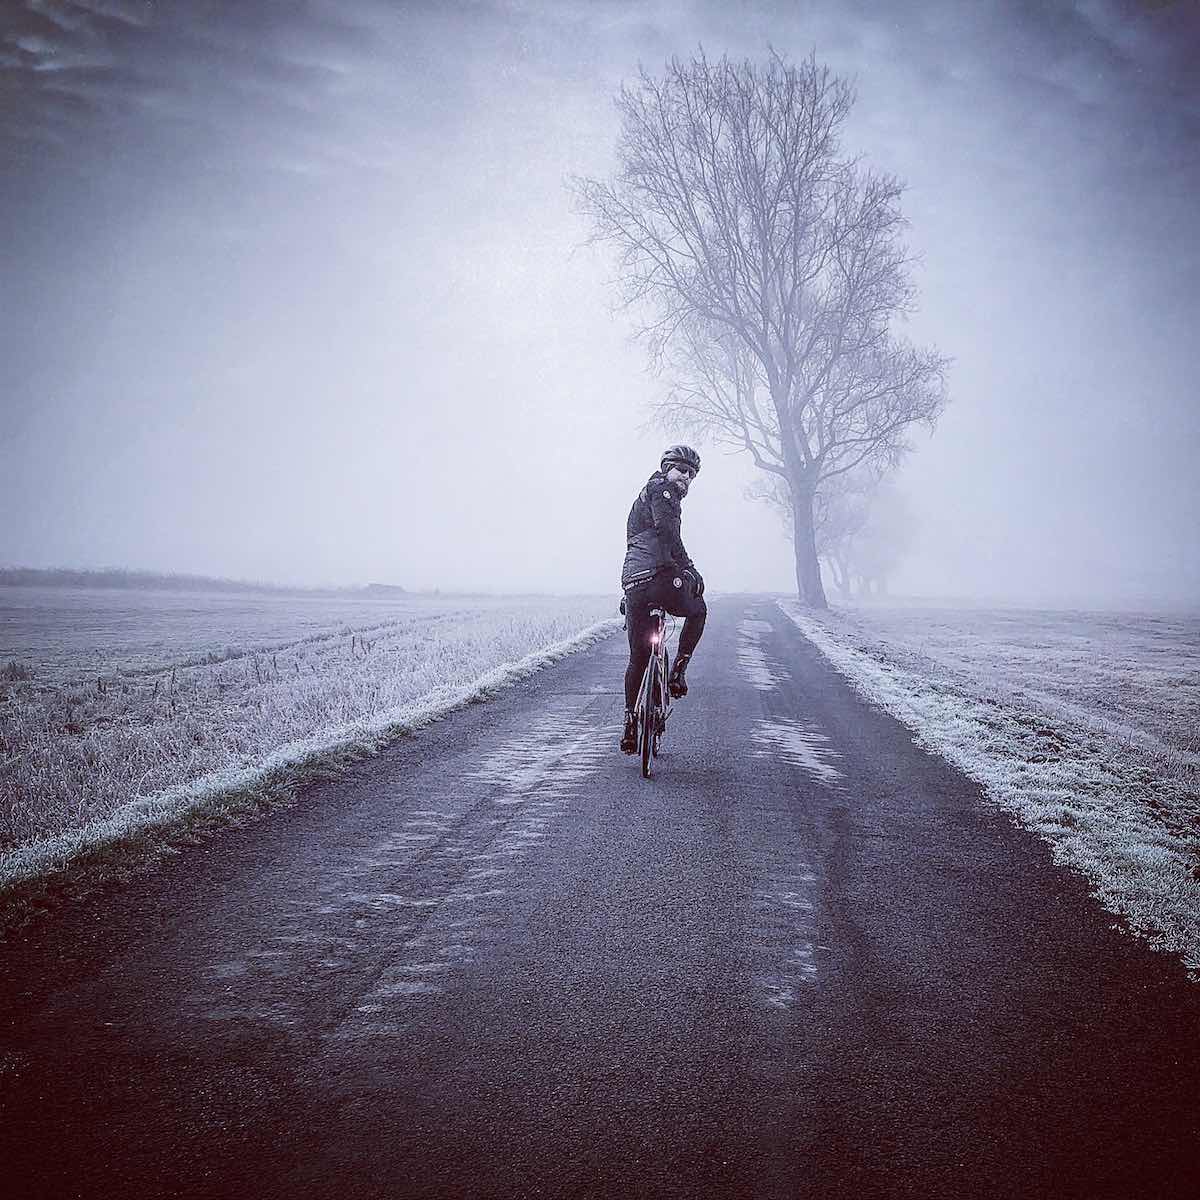 bikerumor pic of the day winter is coming Lancashire UK cyclist on dark road with frost on grass and tree.